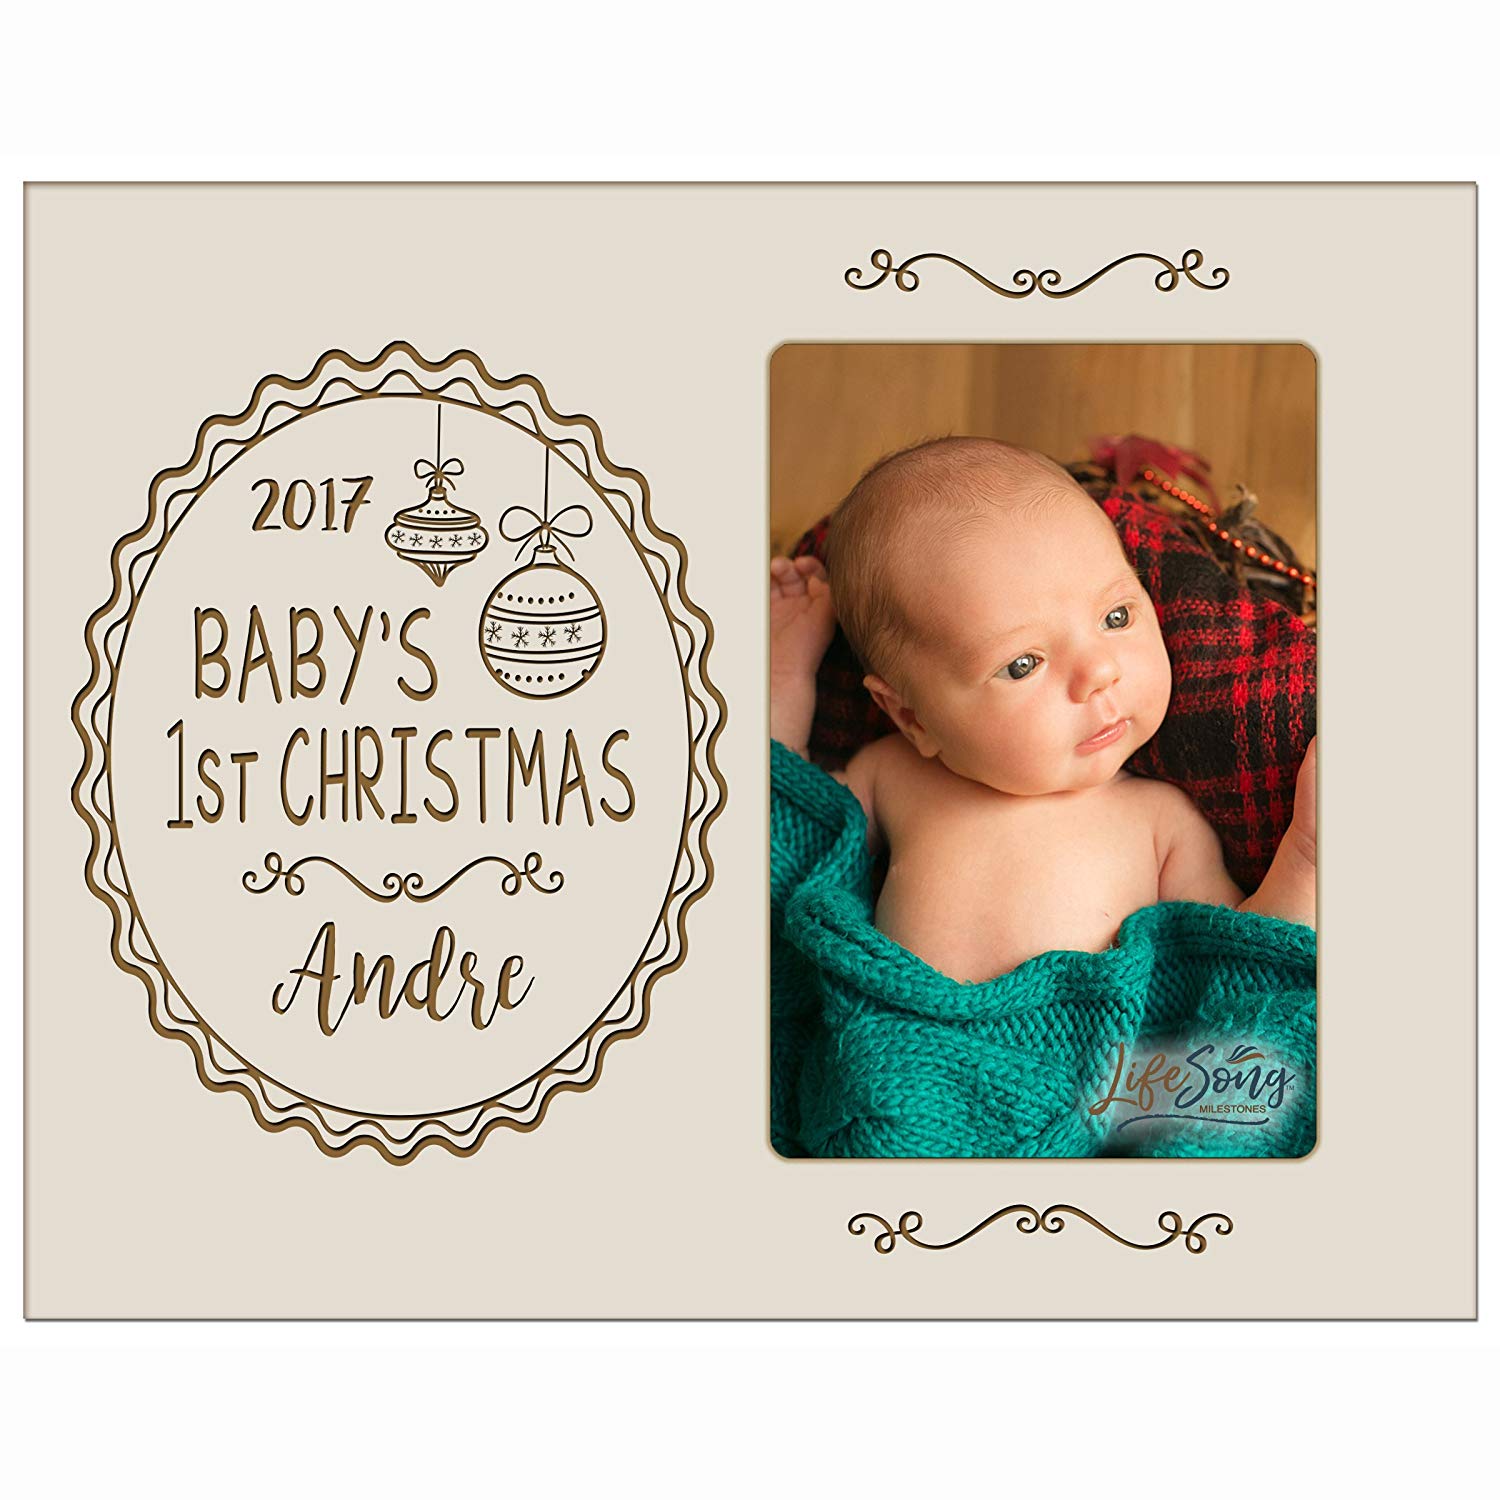 Personalized Home Christmas Ornament Design Photo Frame Holds 4x6 Photograph Cherry